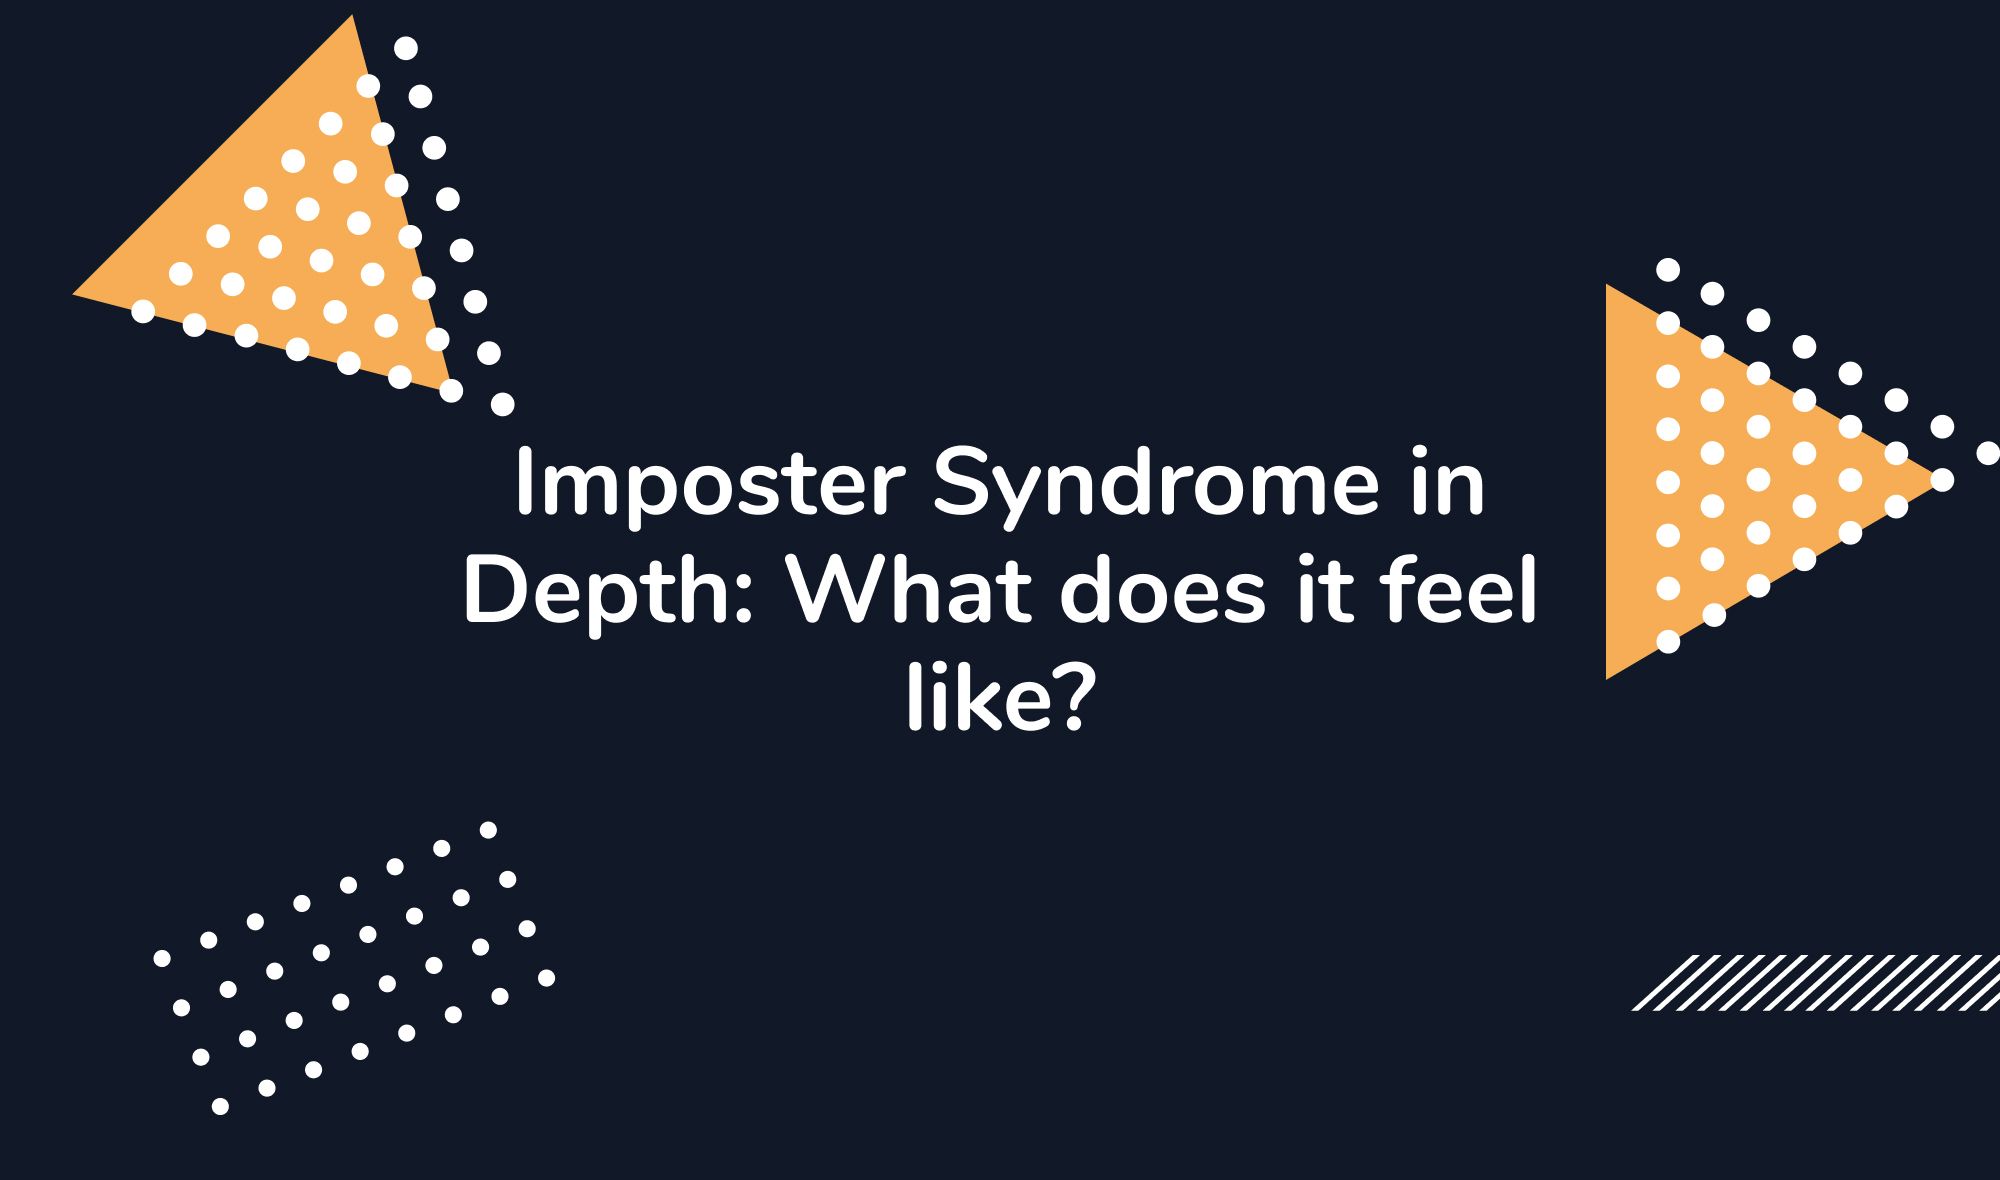 Imposter Syndrome in Depth: What does it feel like?